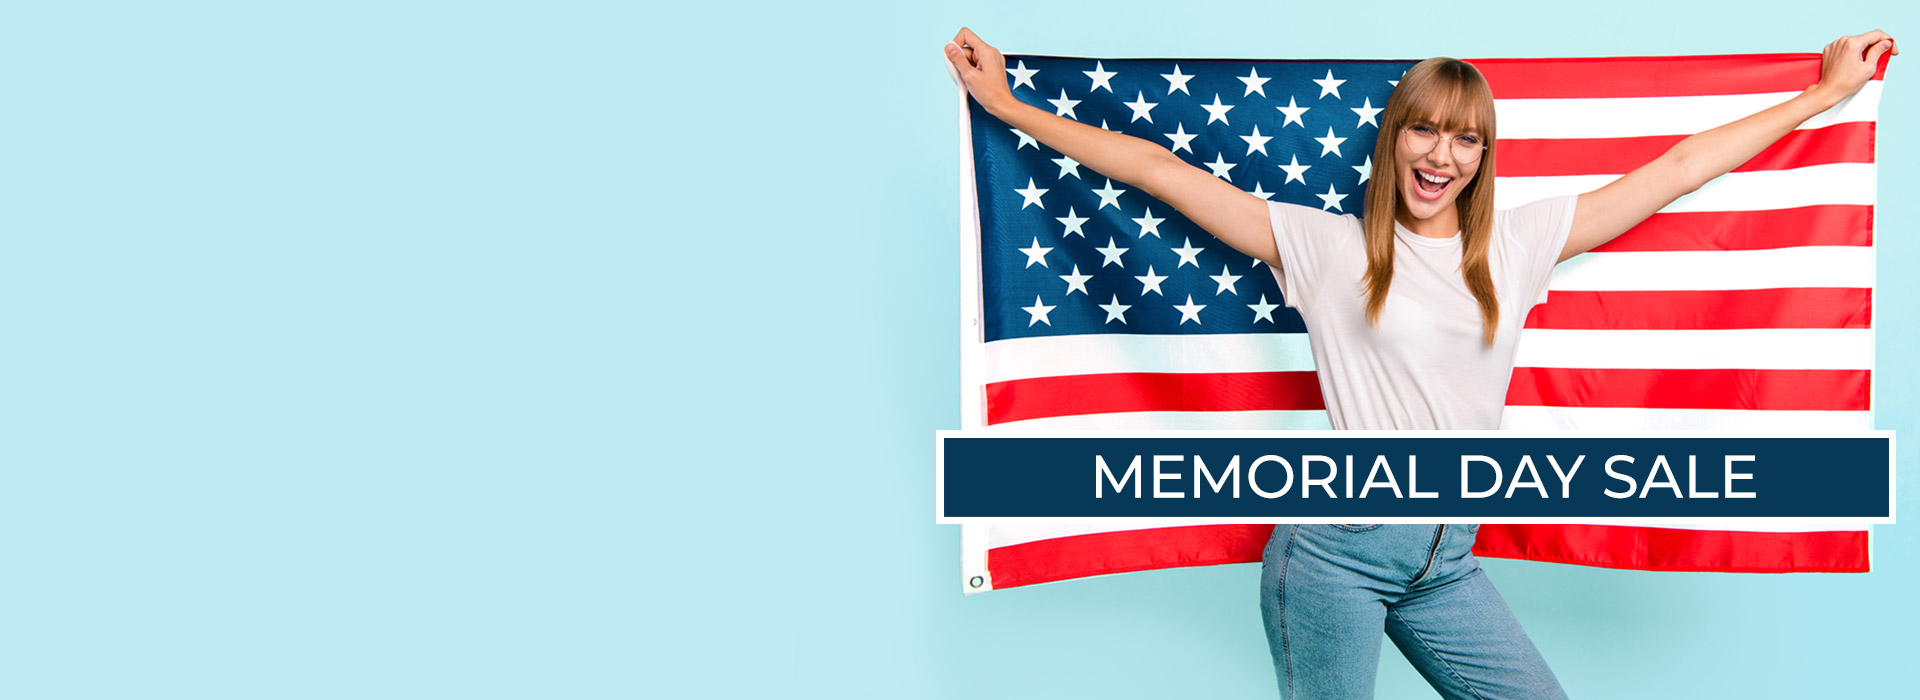 Text: Memorial Day Sale Photo: Woman holding American flag behind her wearing jeans, a white t shirt and eyeglasses